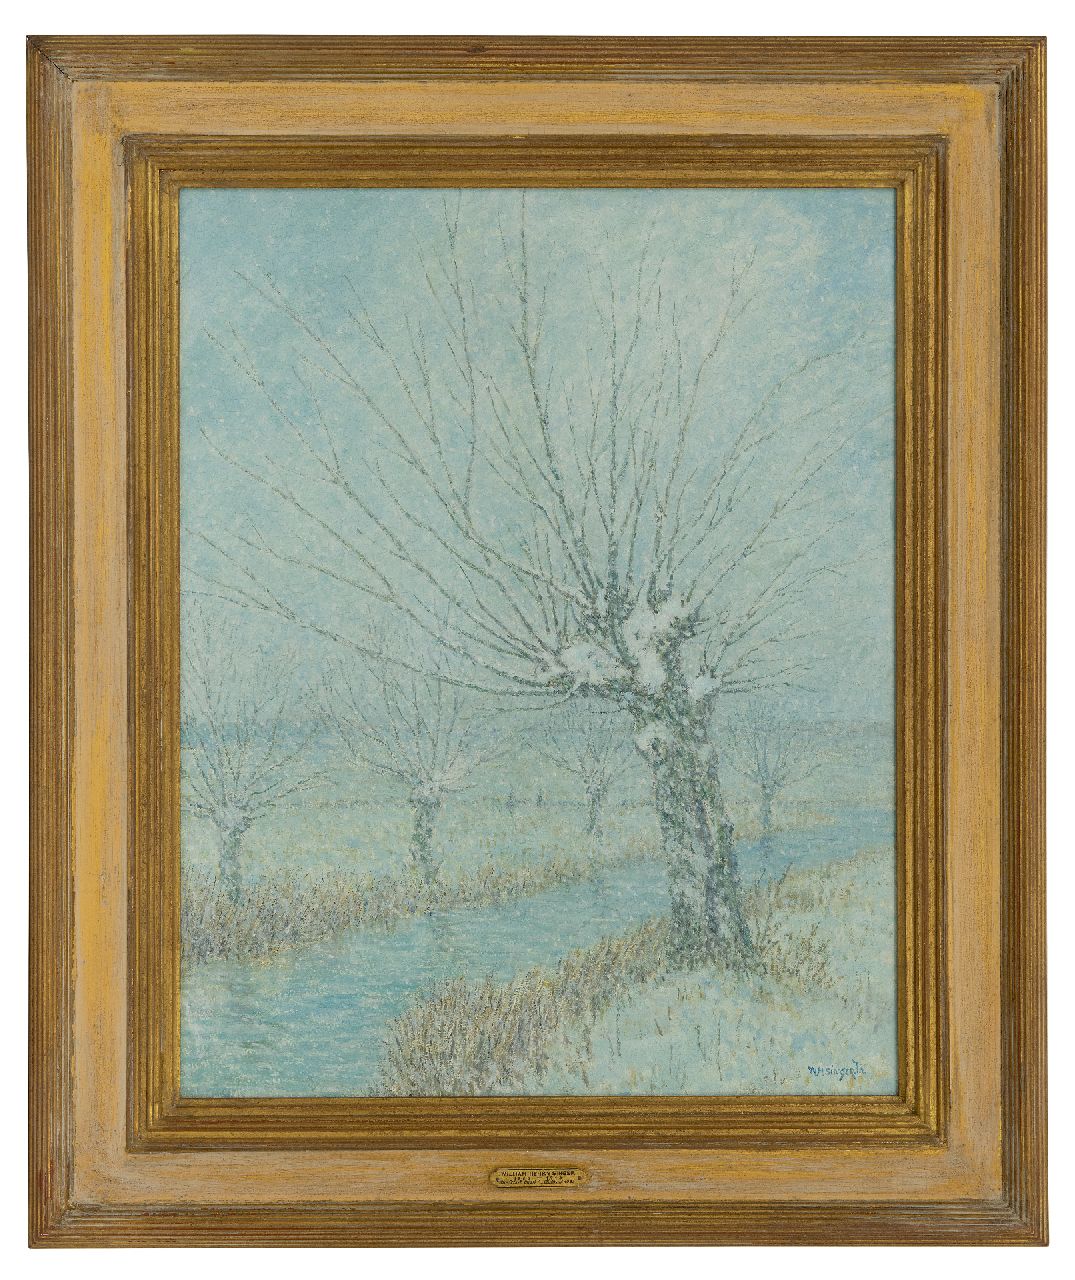 Singer W.H.  | William Henry Singer, The First Snow, Holland, oil on board 50.5 x 40.0 cm, signed l.r. and dated on the reverse 1933